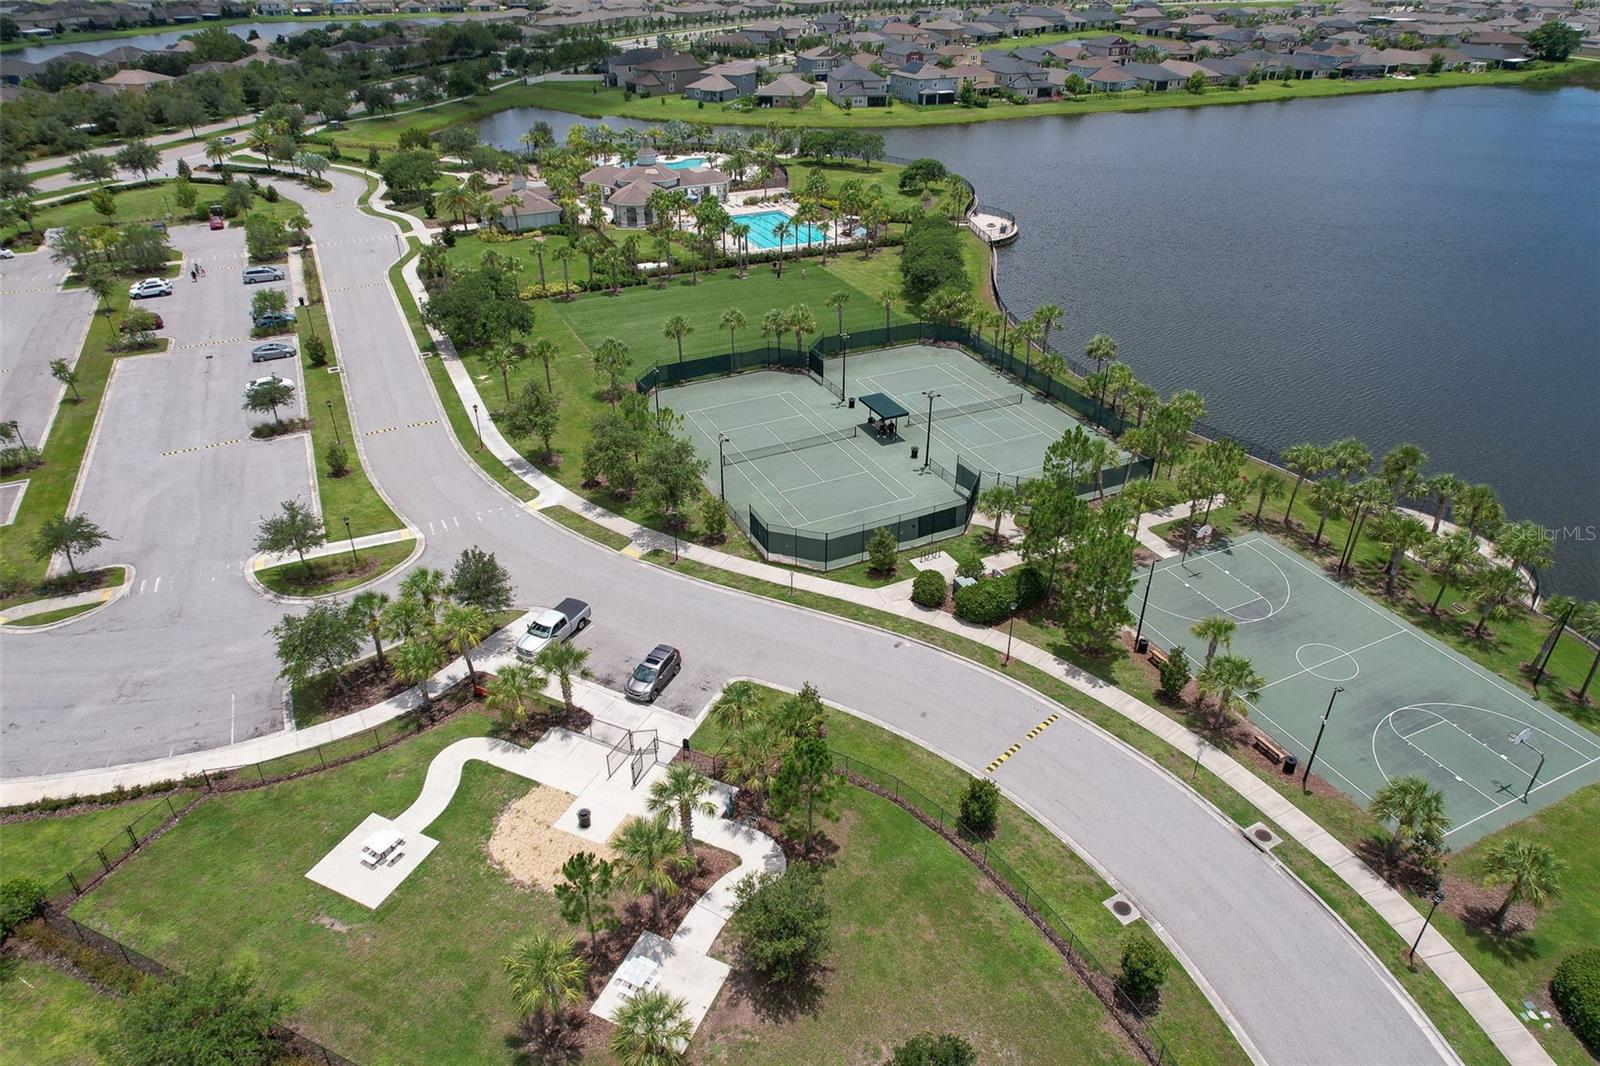 View of dog park, tennis courts, basketball court and turfed sports field.